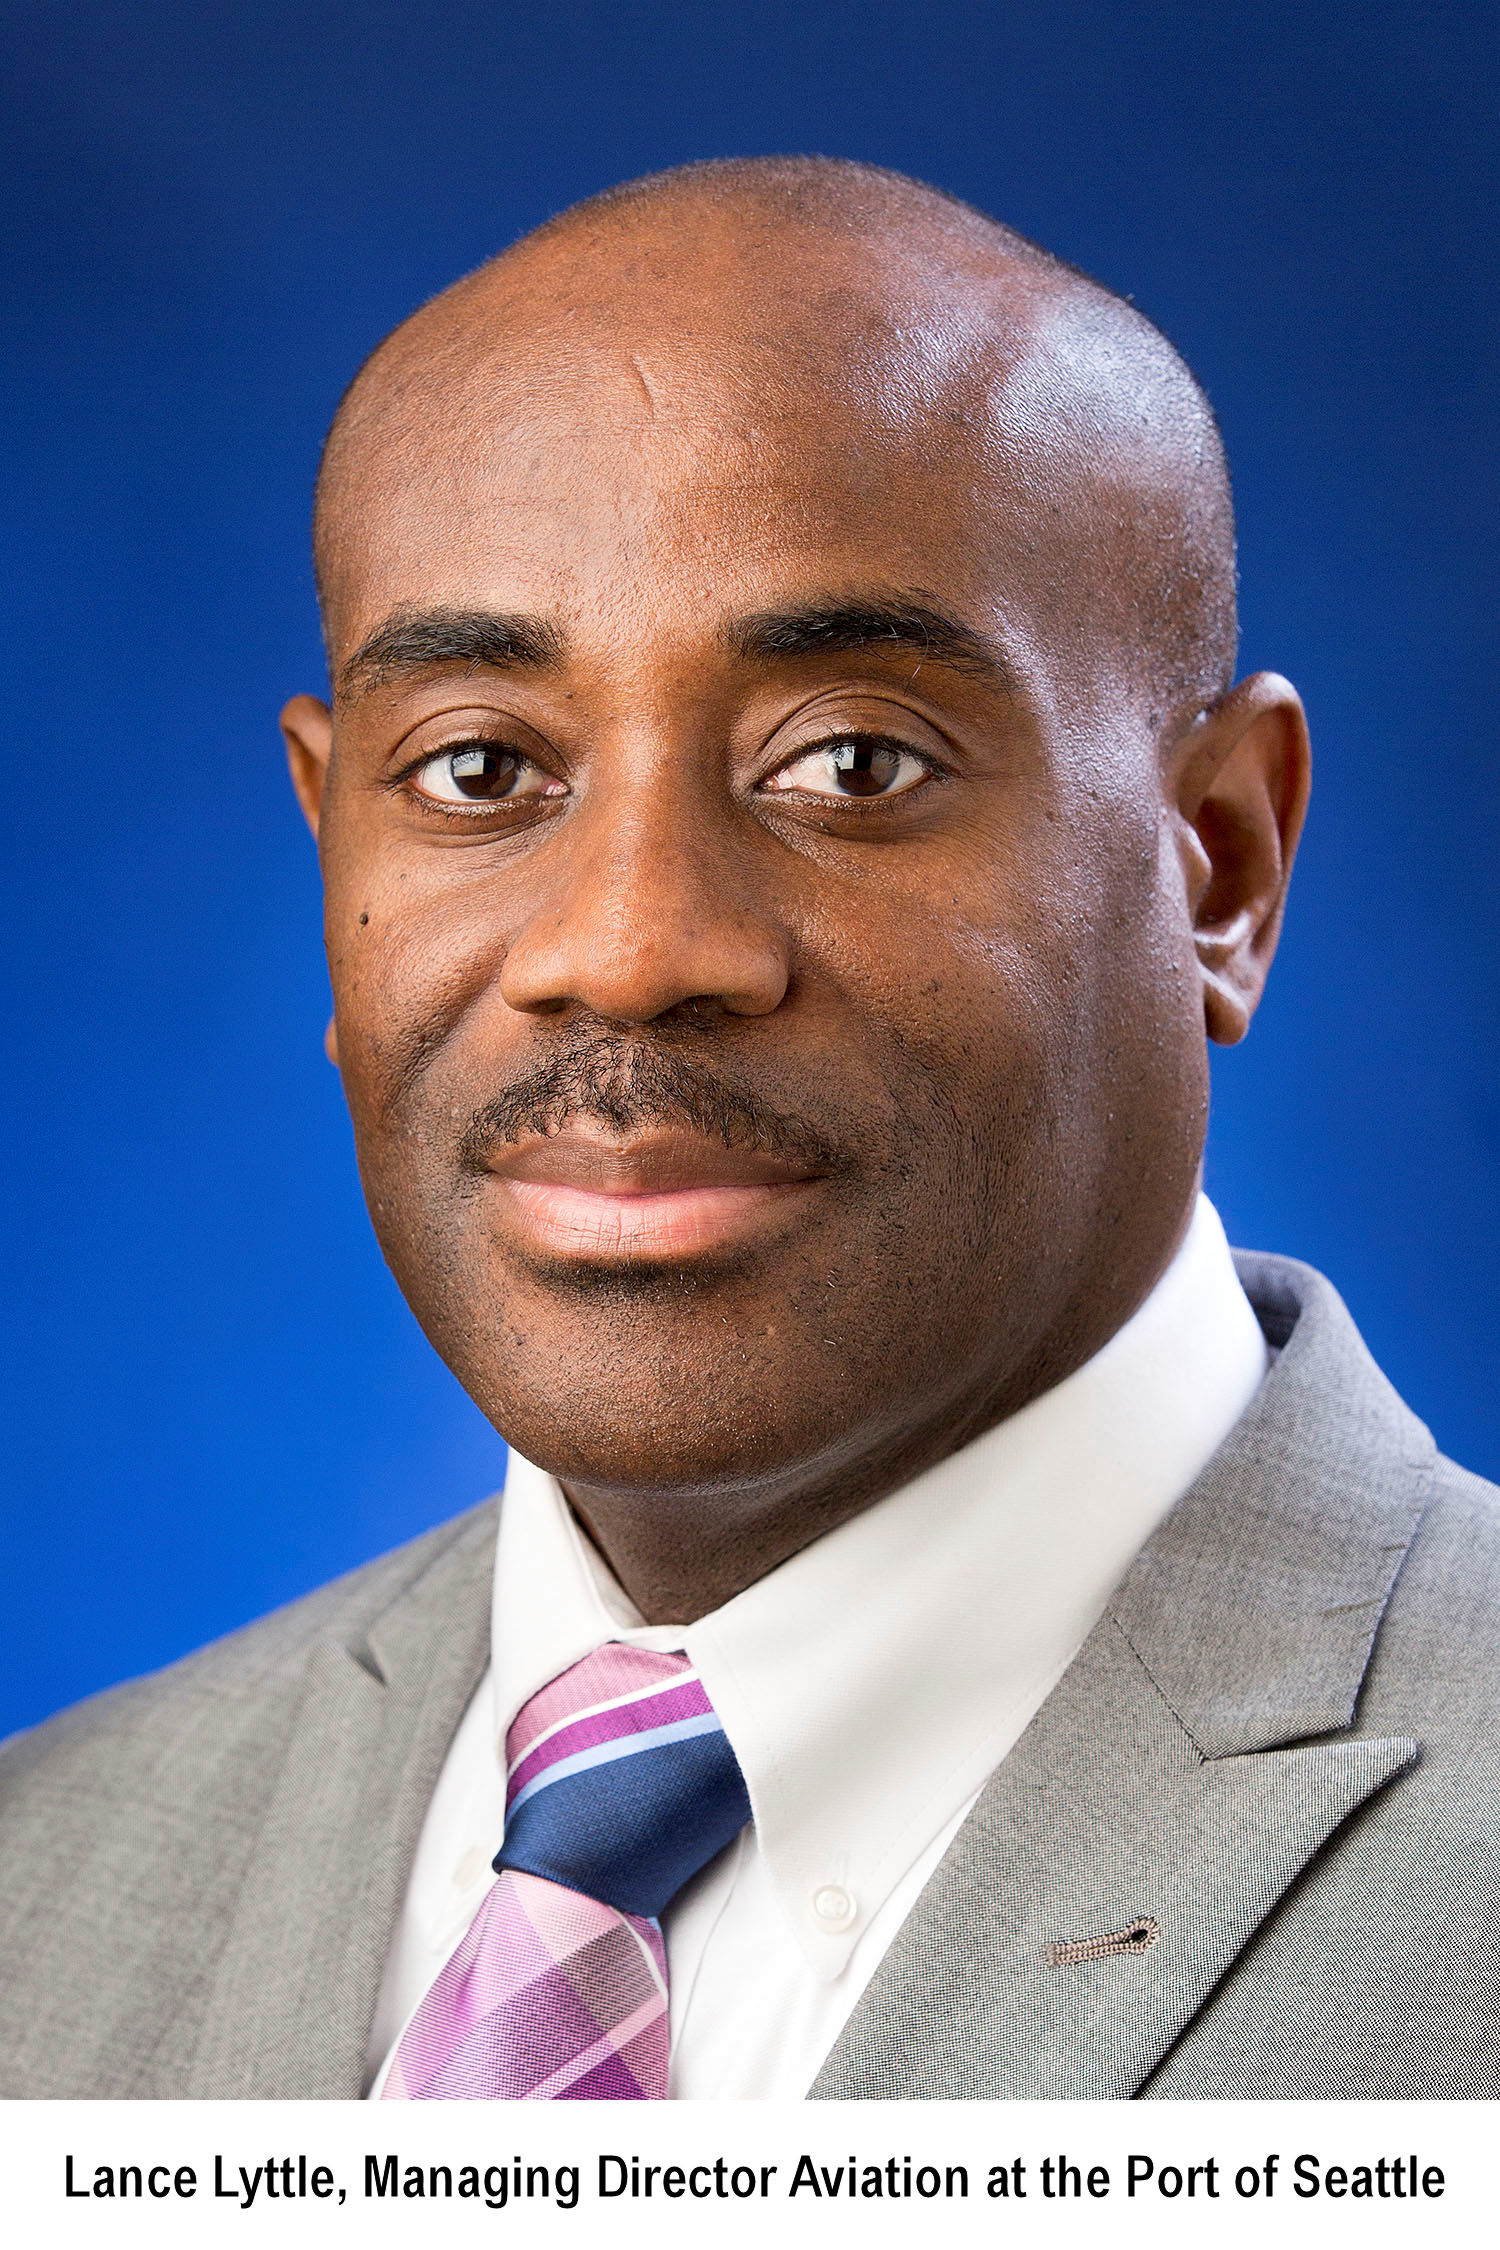 Lance Lyttle, Managing Director Aviation at the Port of Seattle